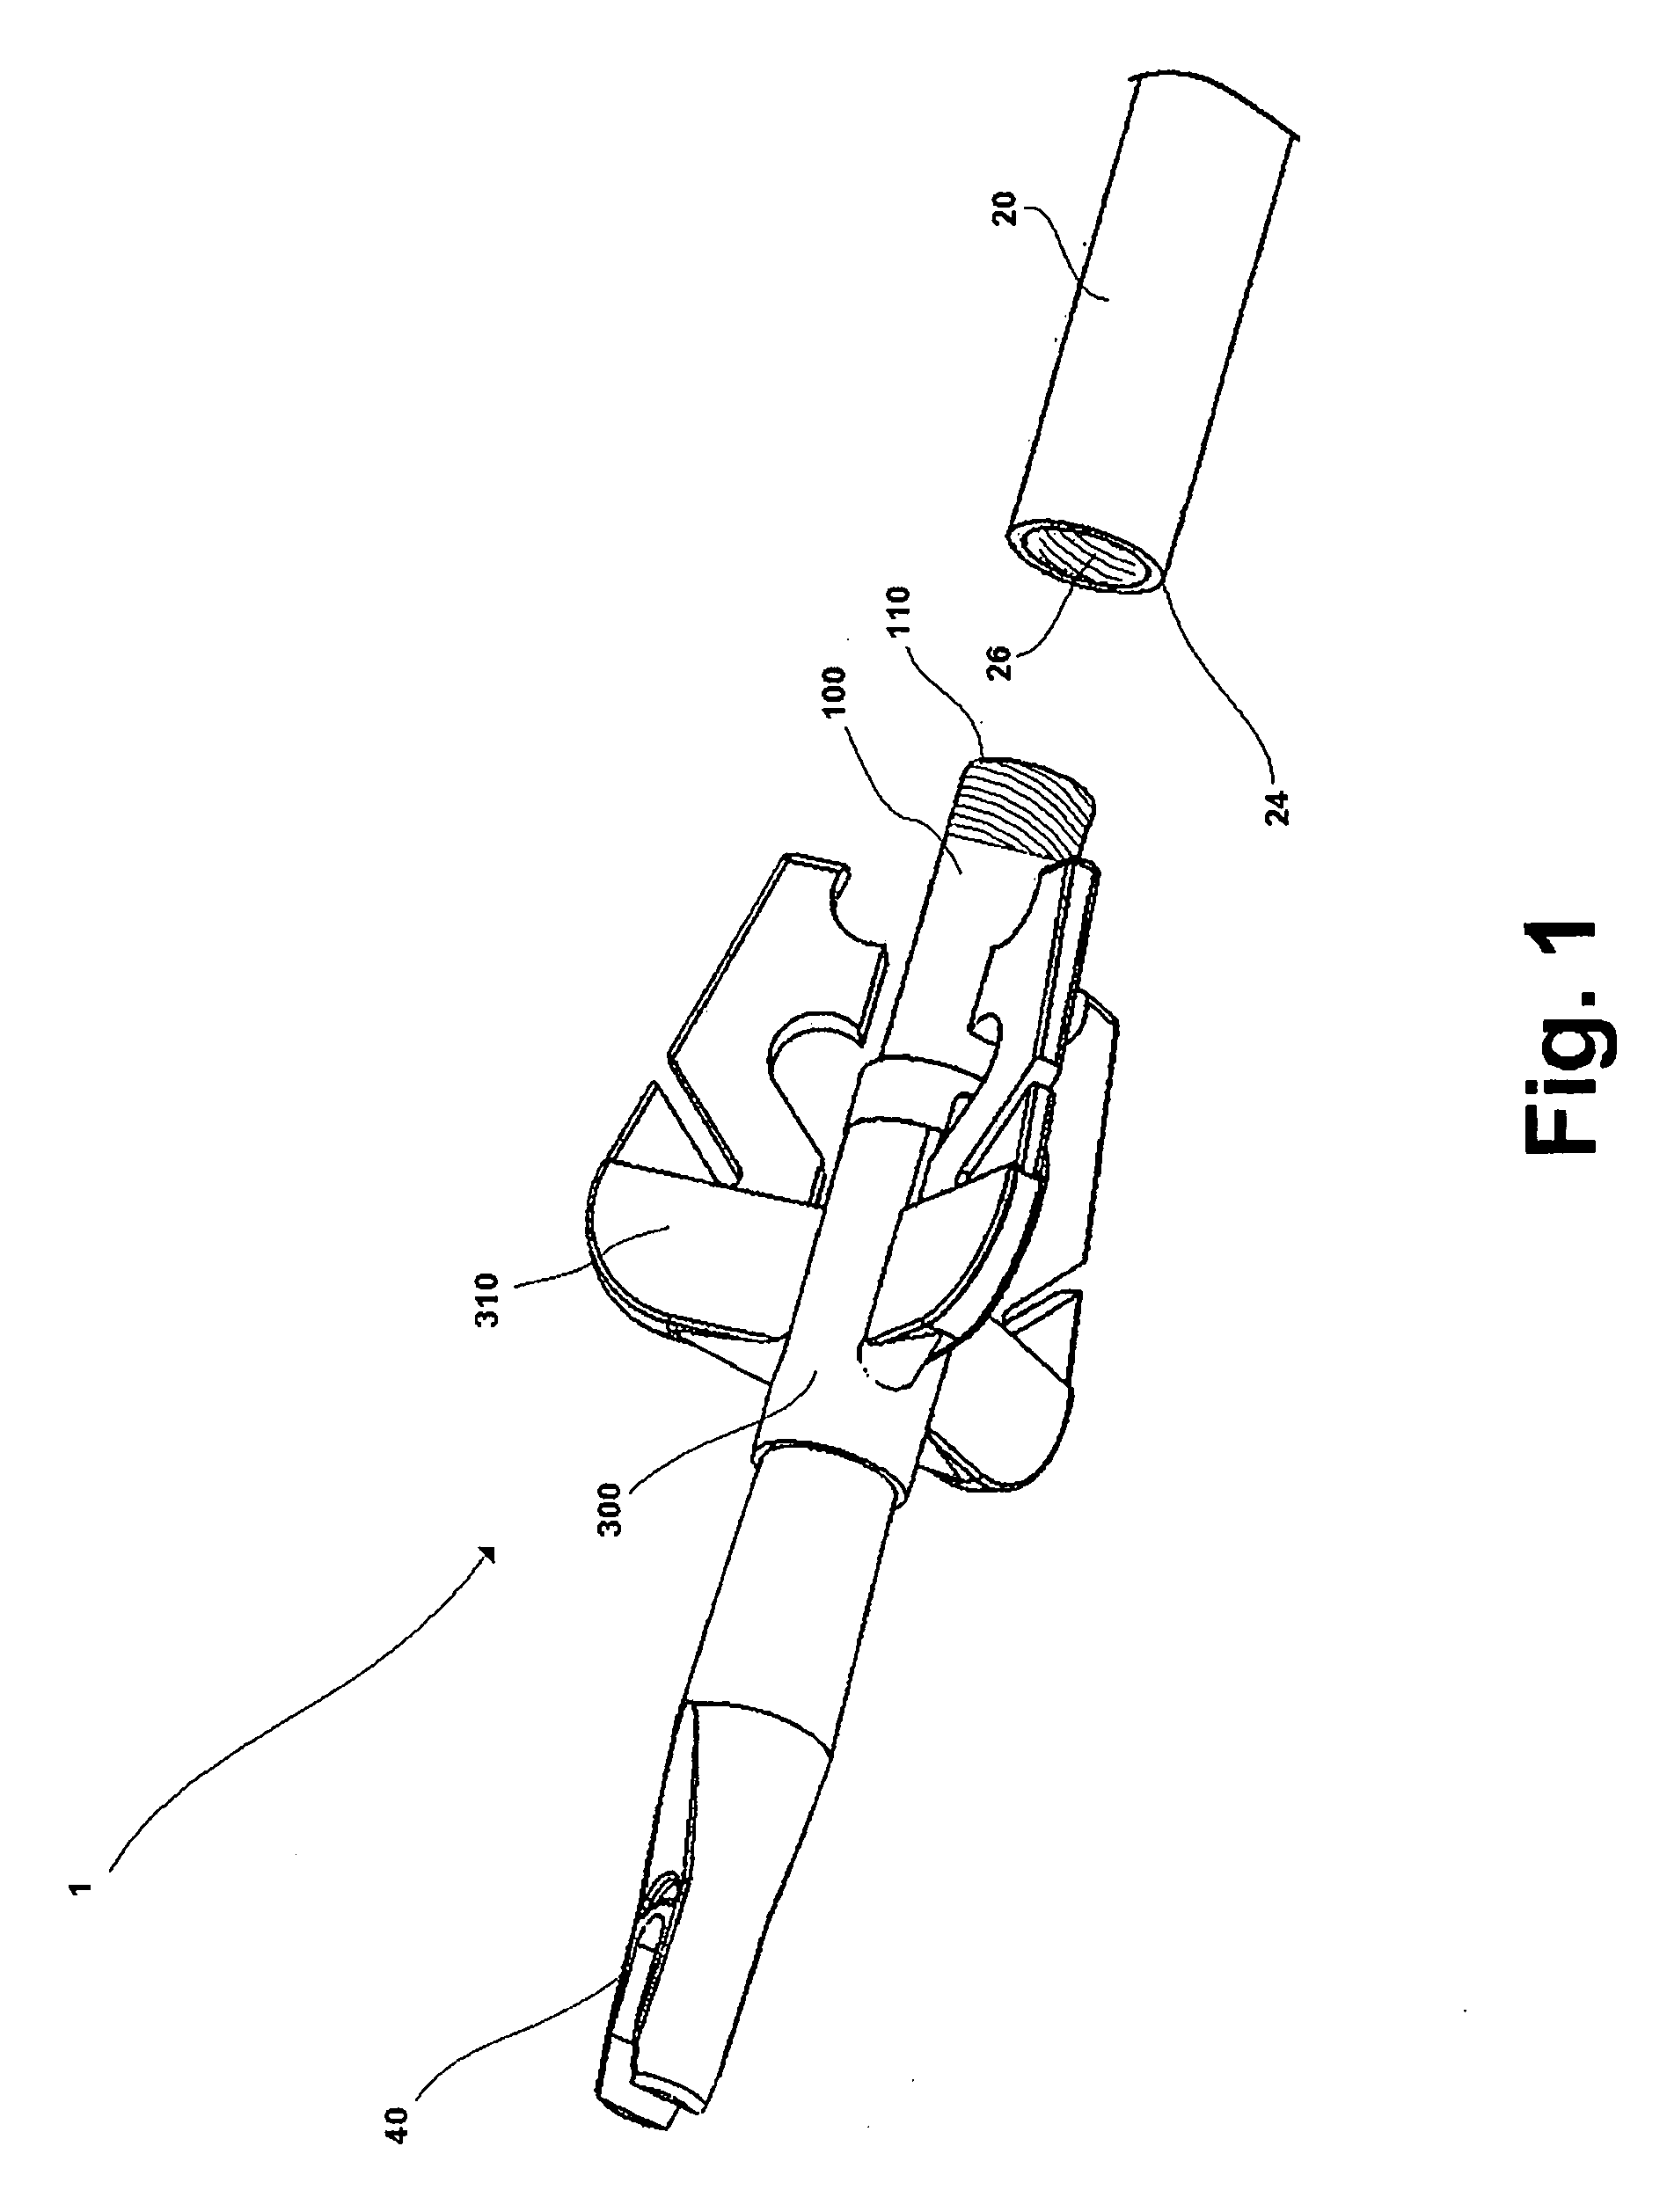 Rear mounted penetration limiter for bow-fired projectiles